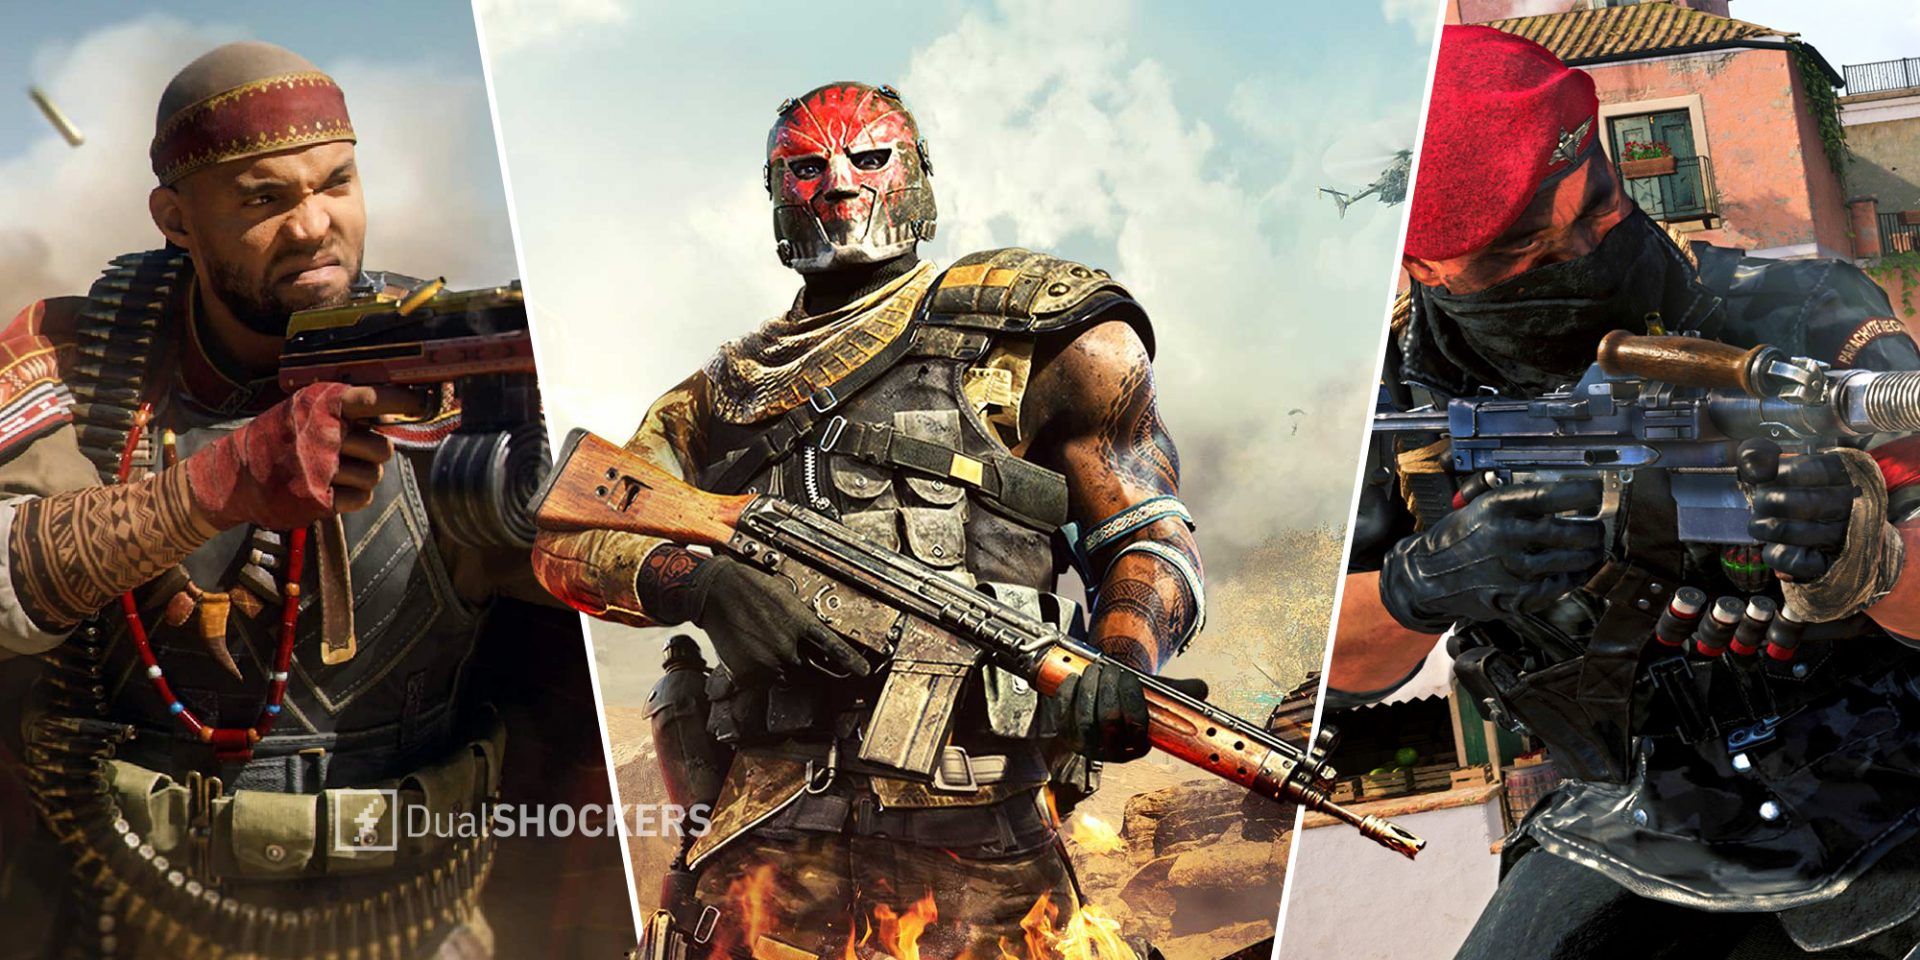 Call of Duty Warzone season 4 character with gun on left, Warzone season 4 promo image in middle, character with rifle on right